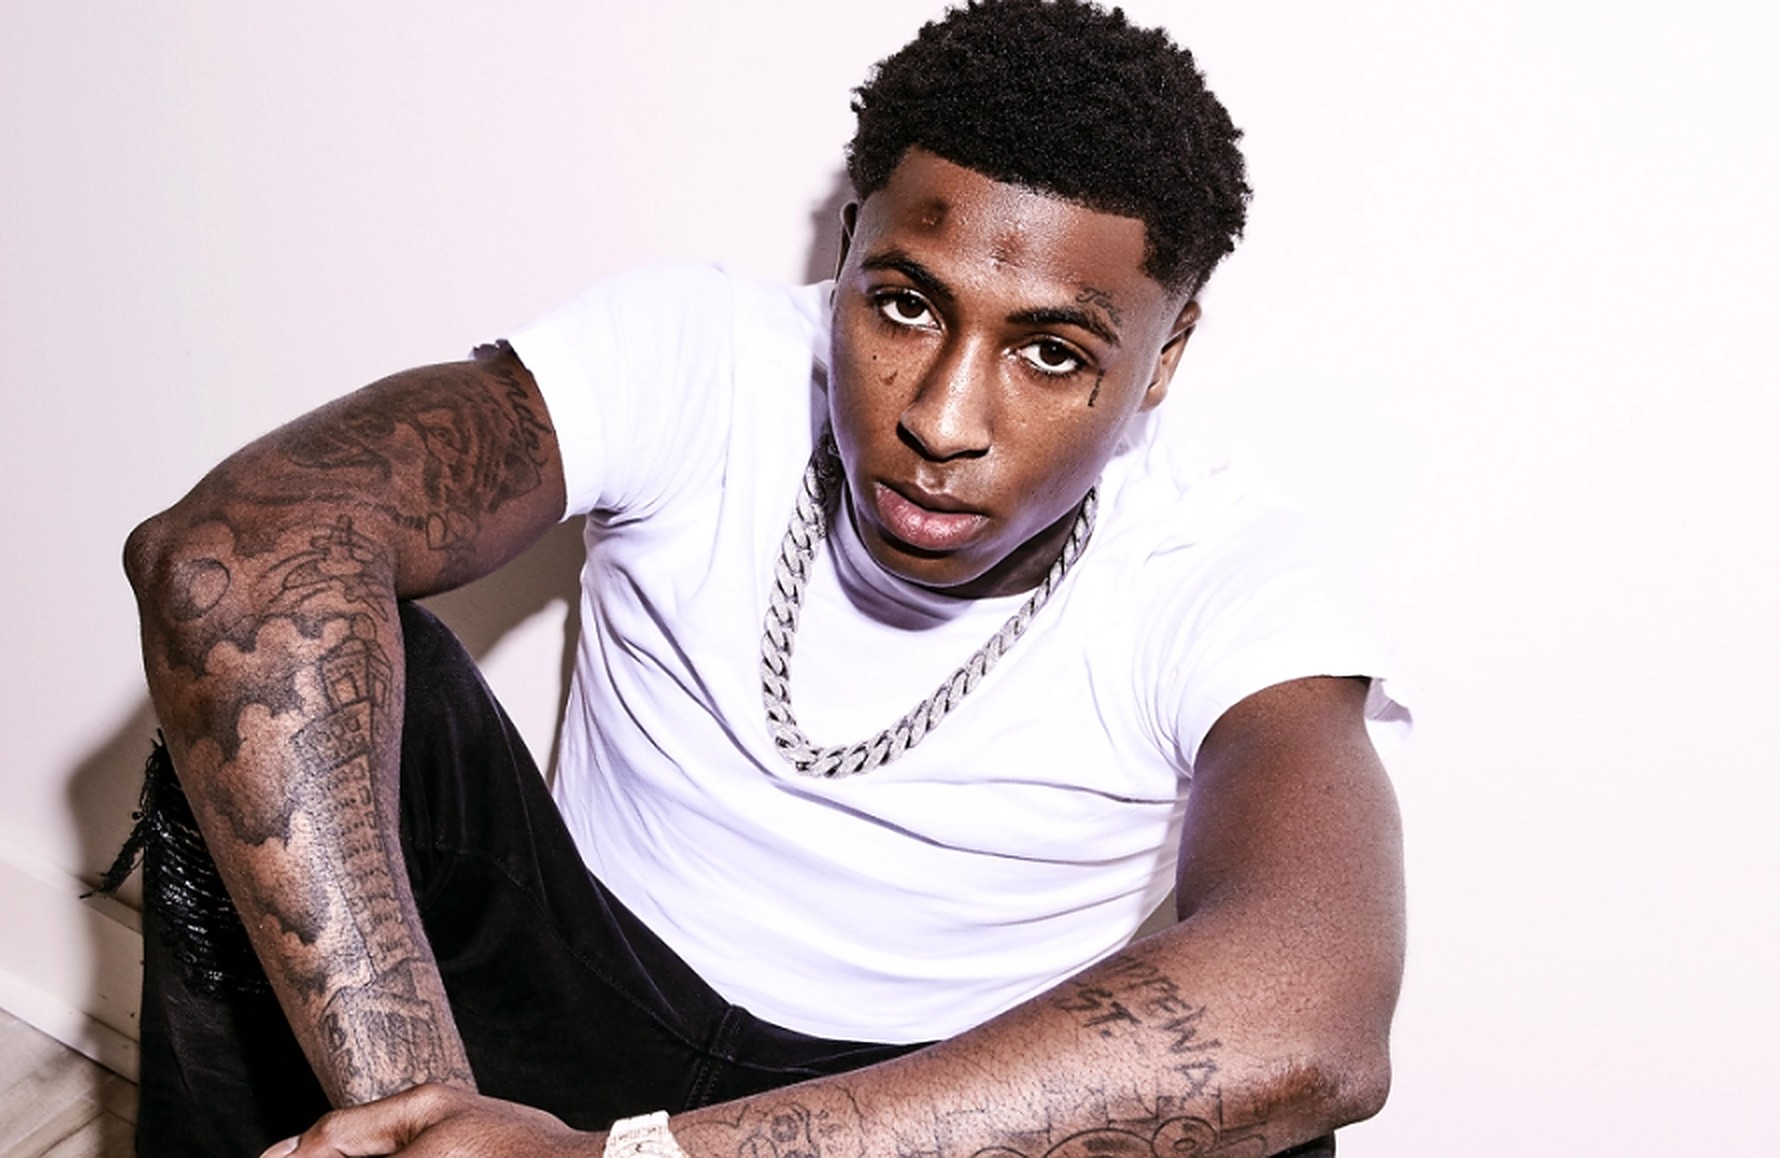 5 paragraph essay about nba youngboy